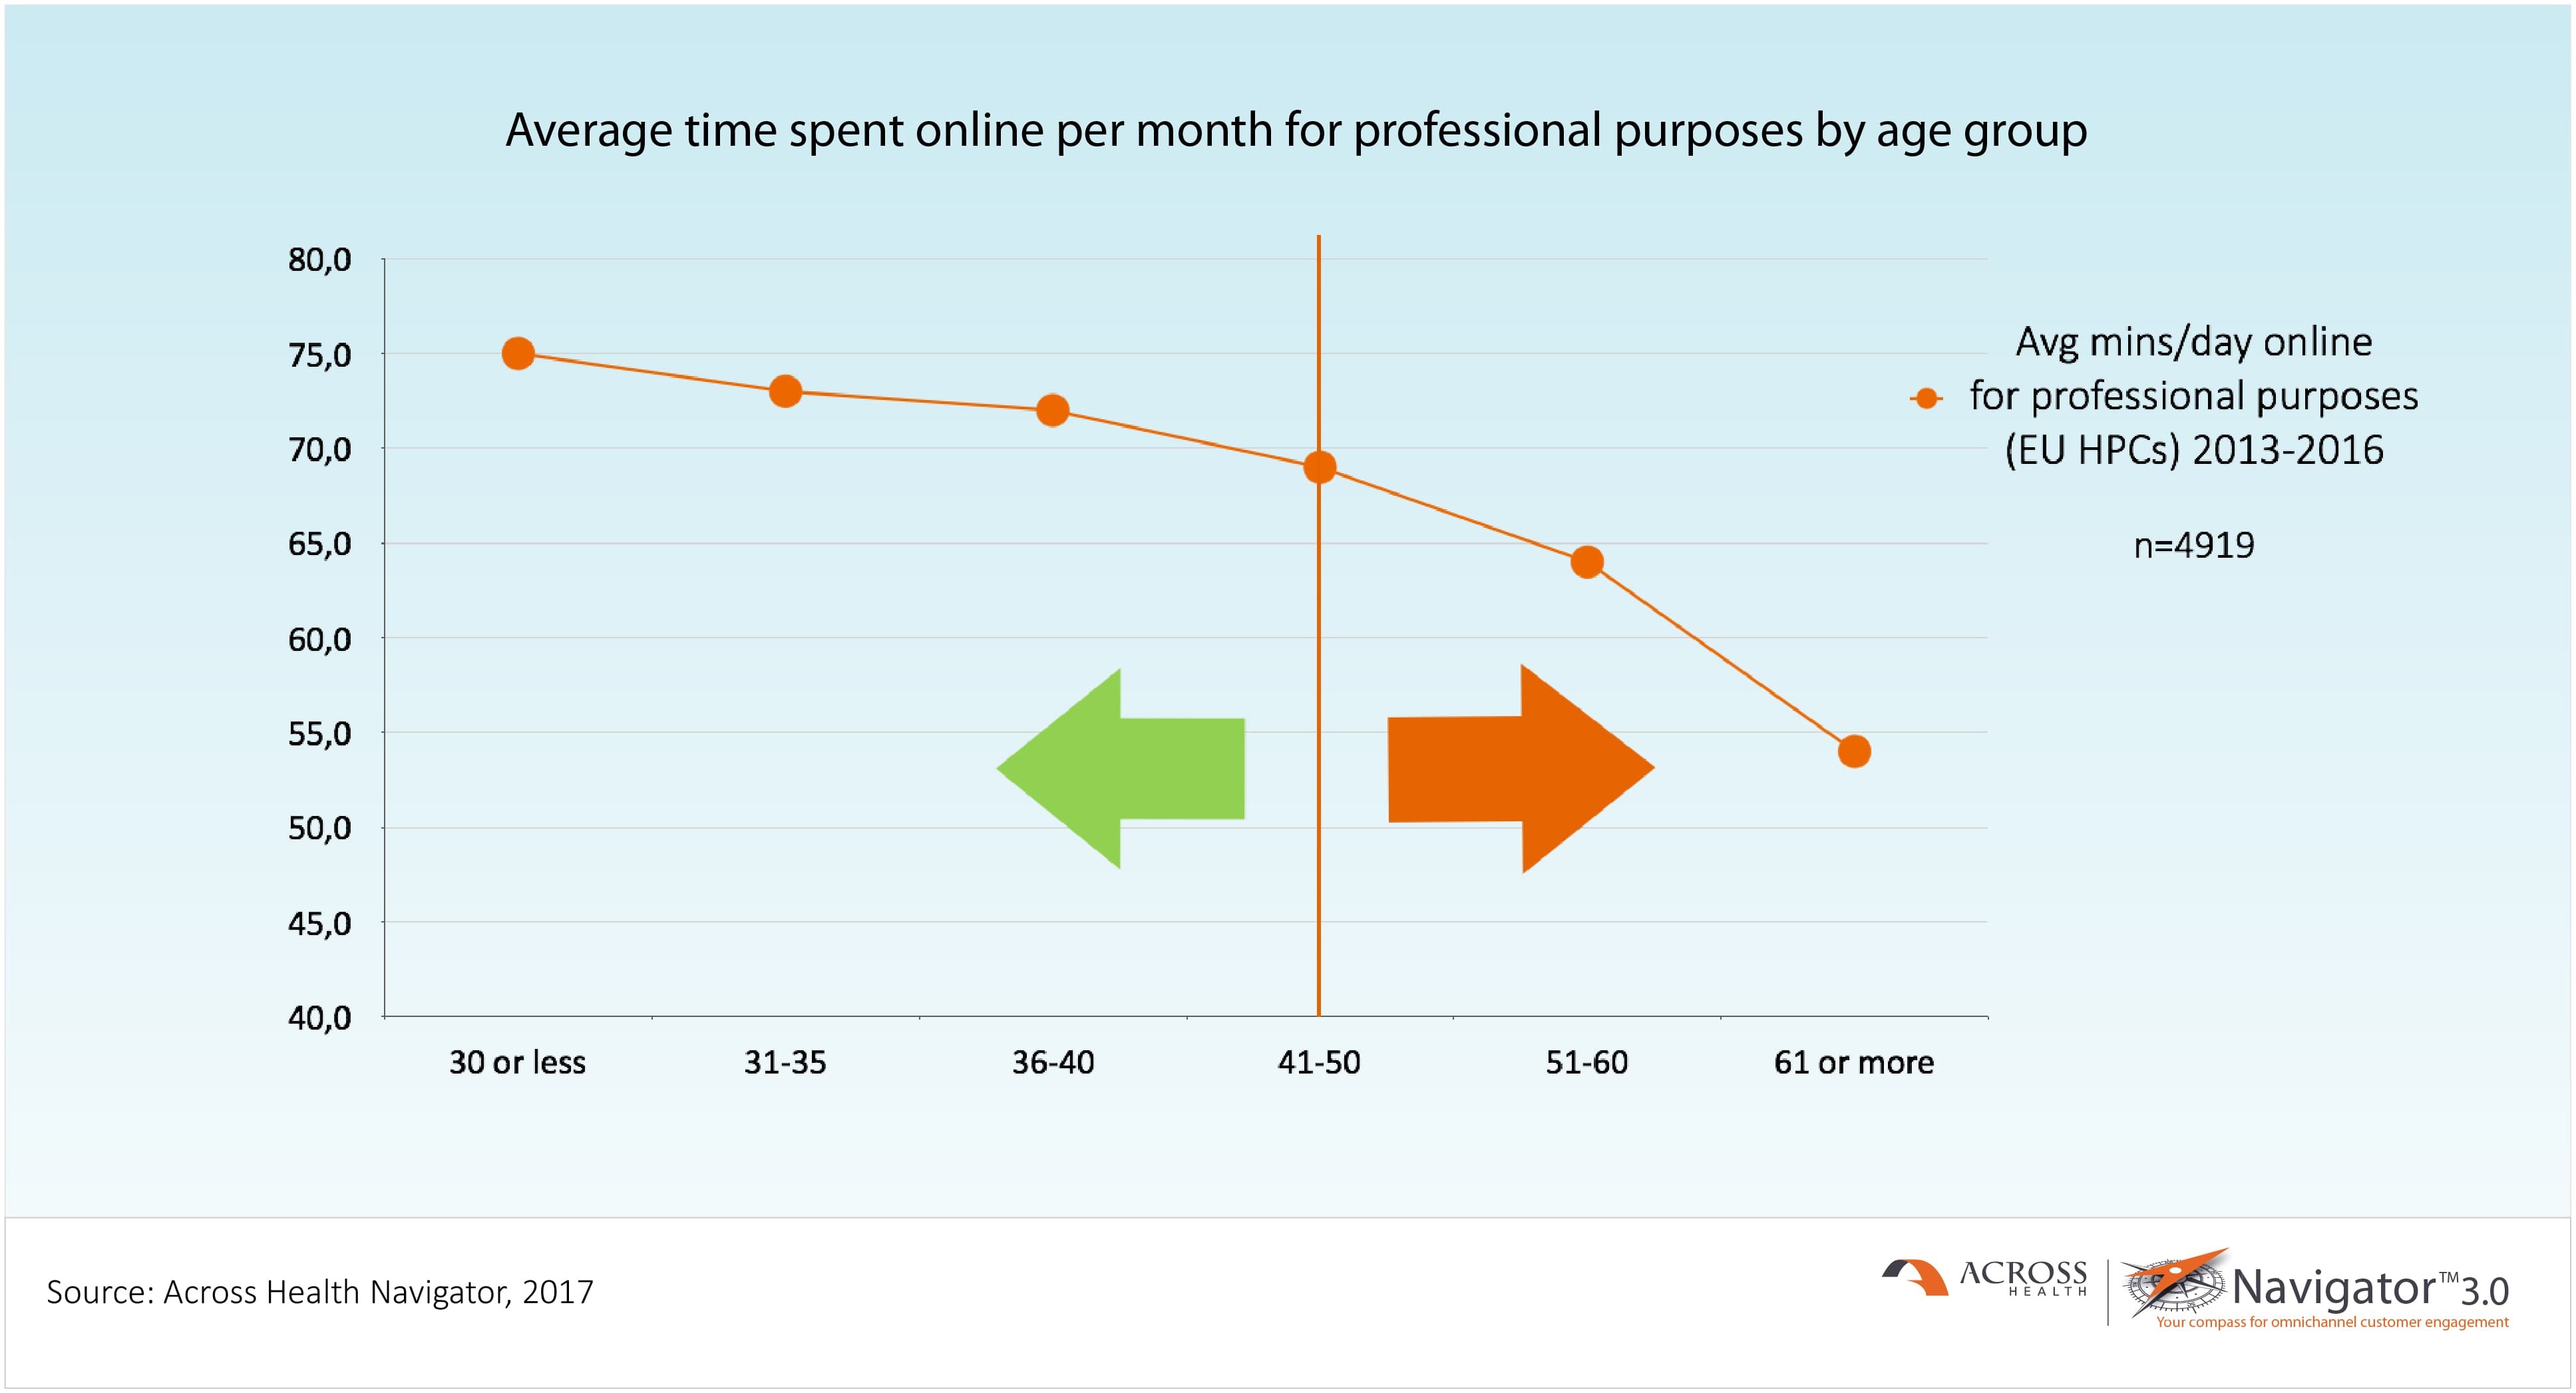 Average time spent online per month for professional purposes by age group